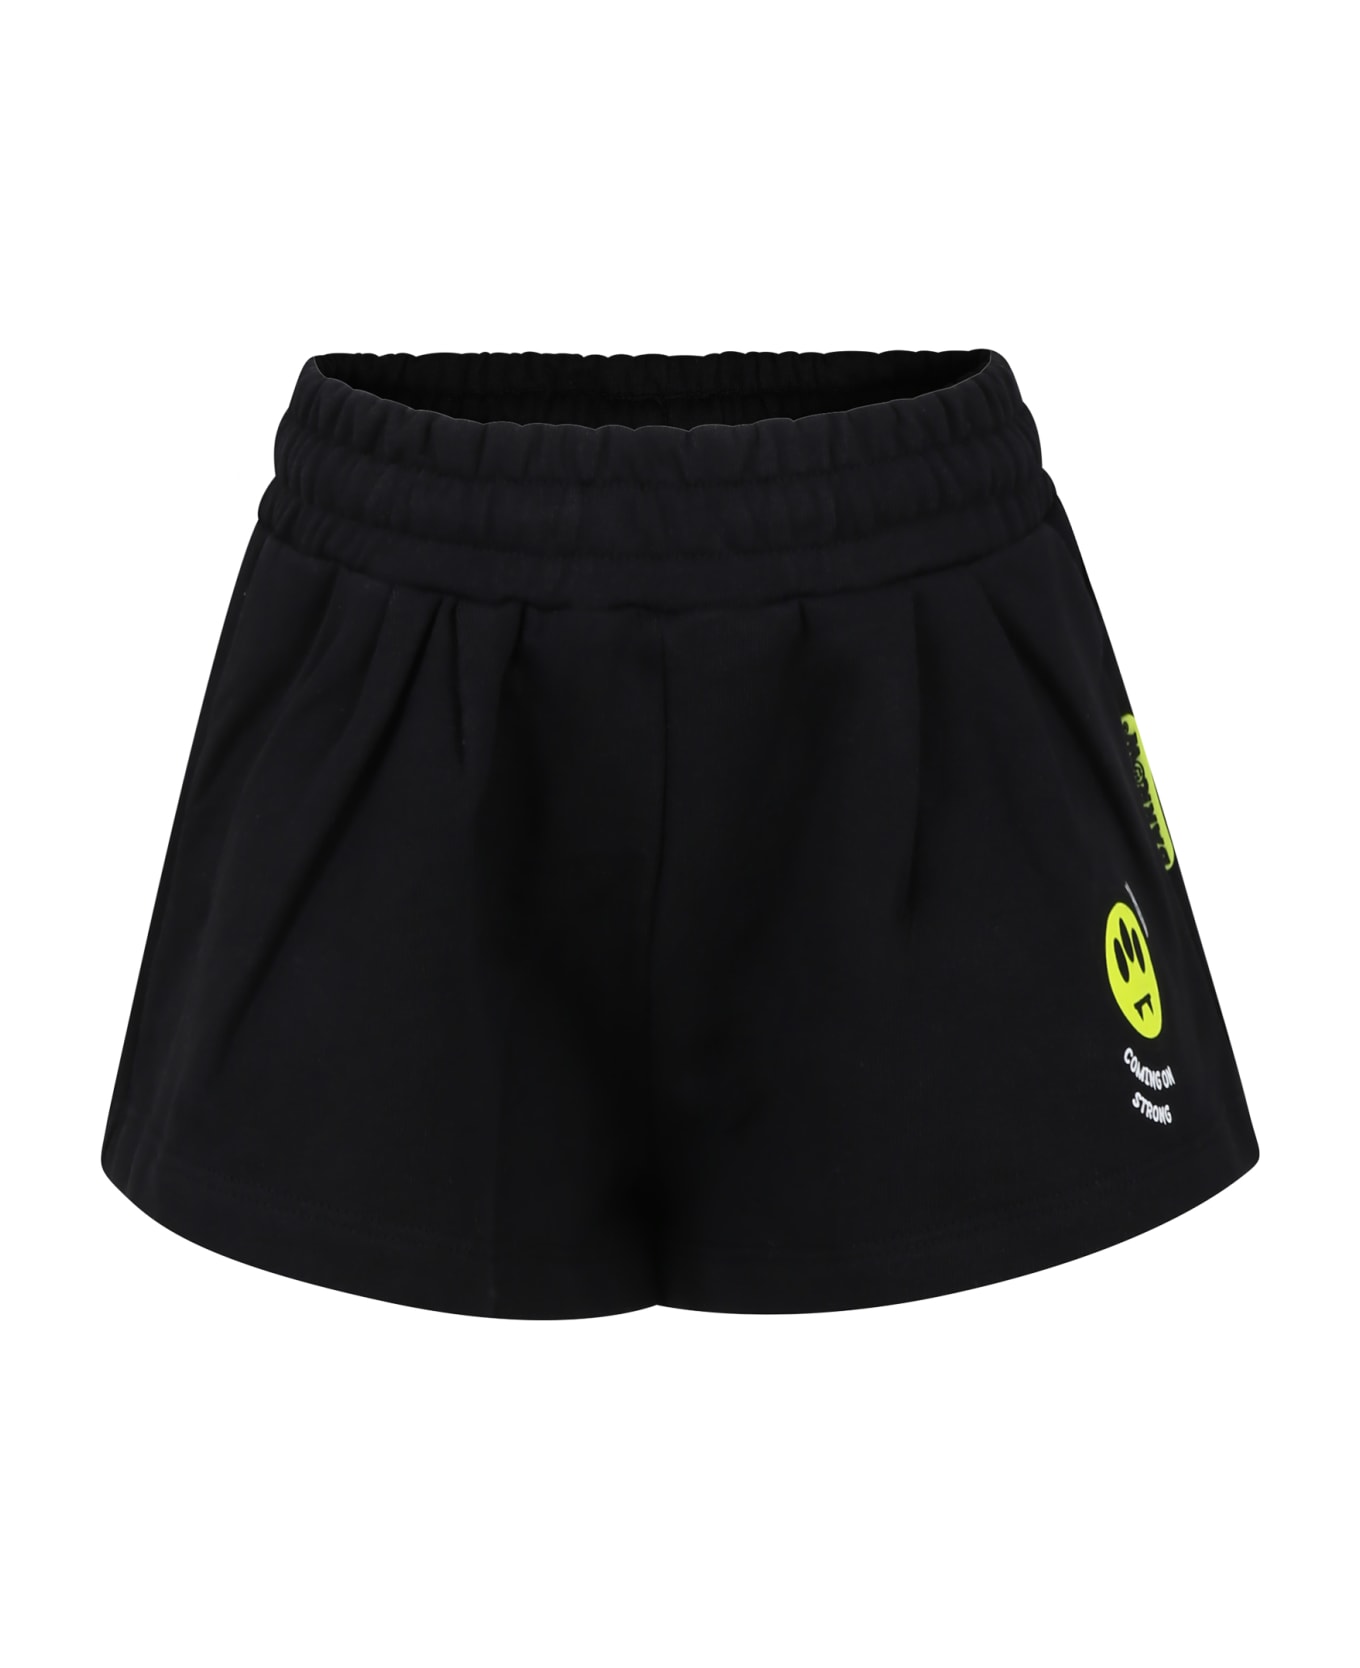 Barrow Black Shorts For Girl With Smiley Faces - Nero